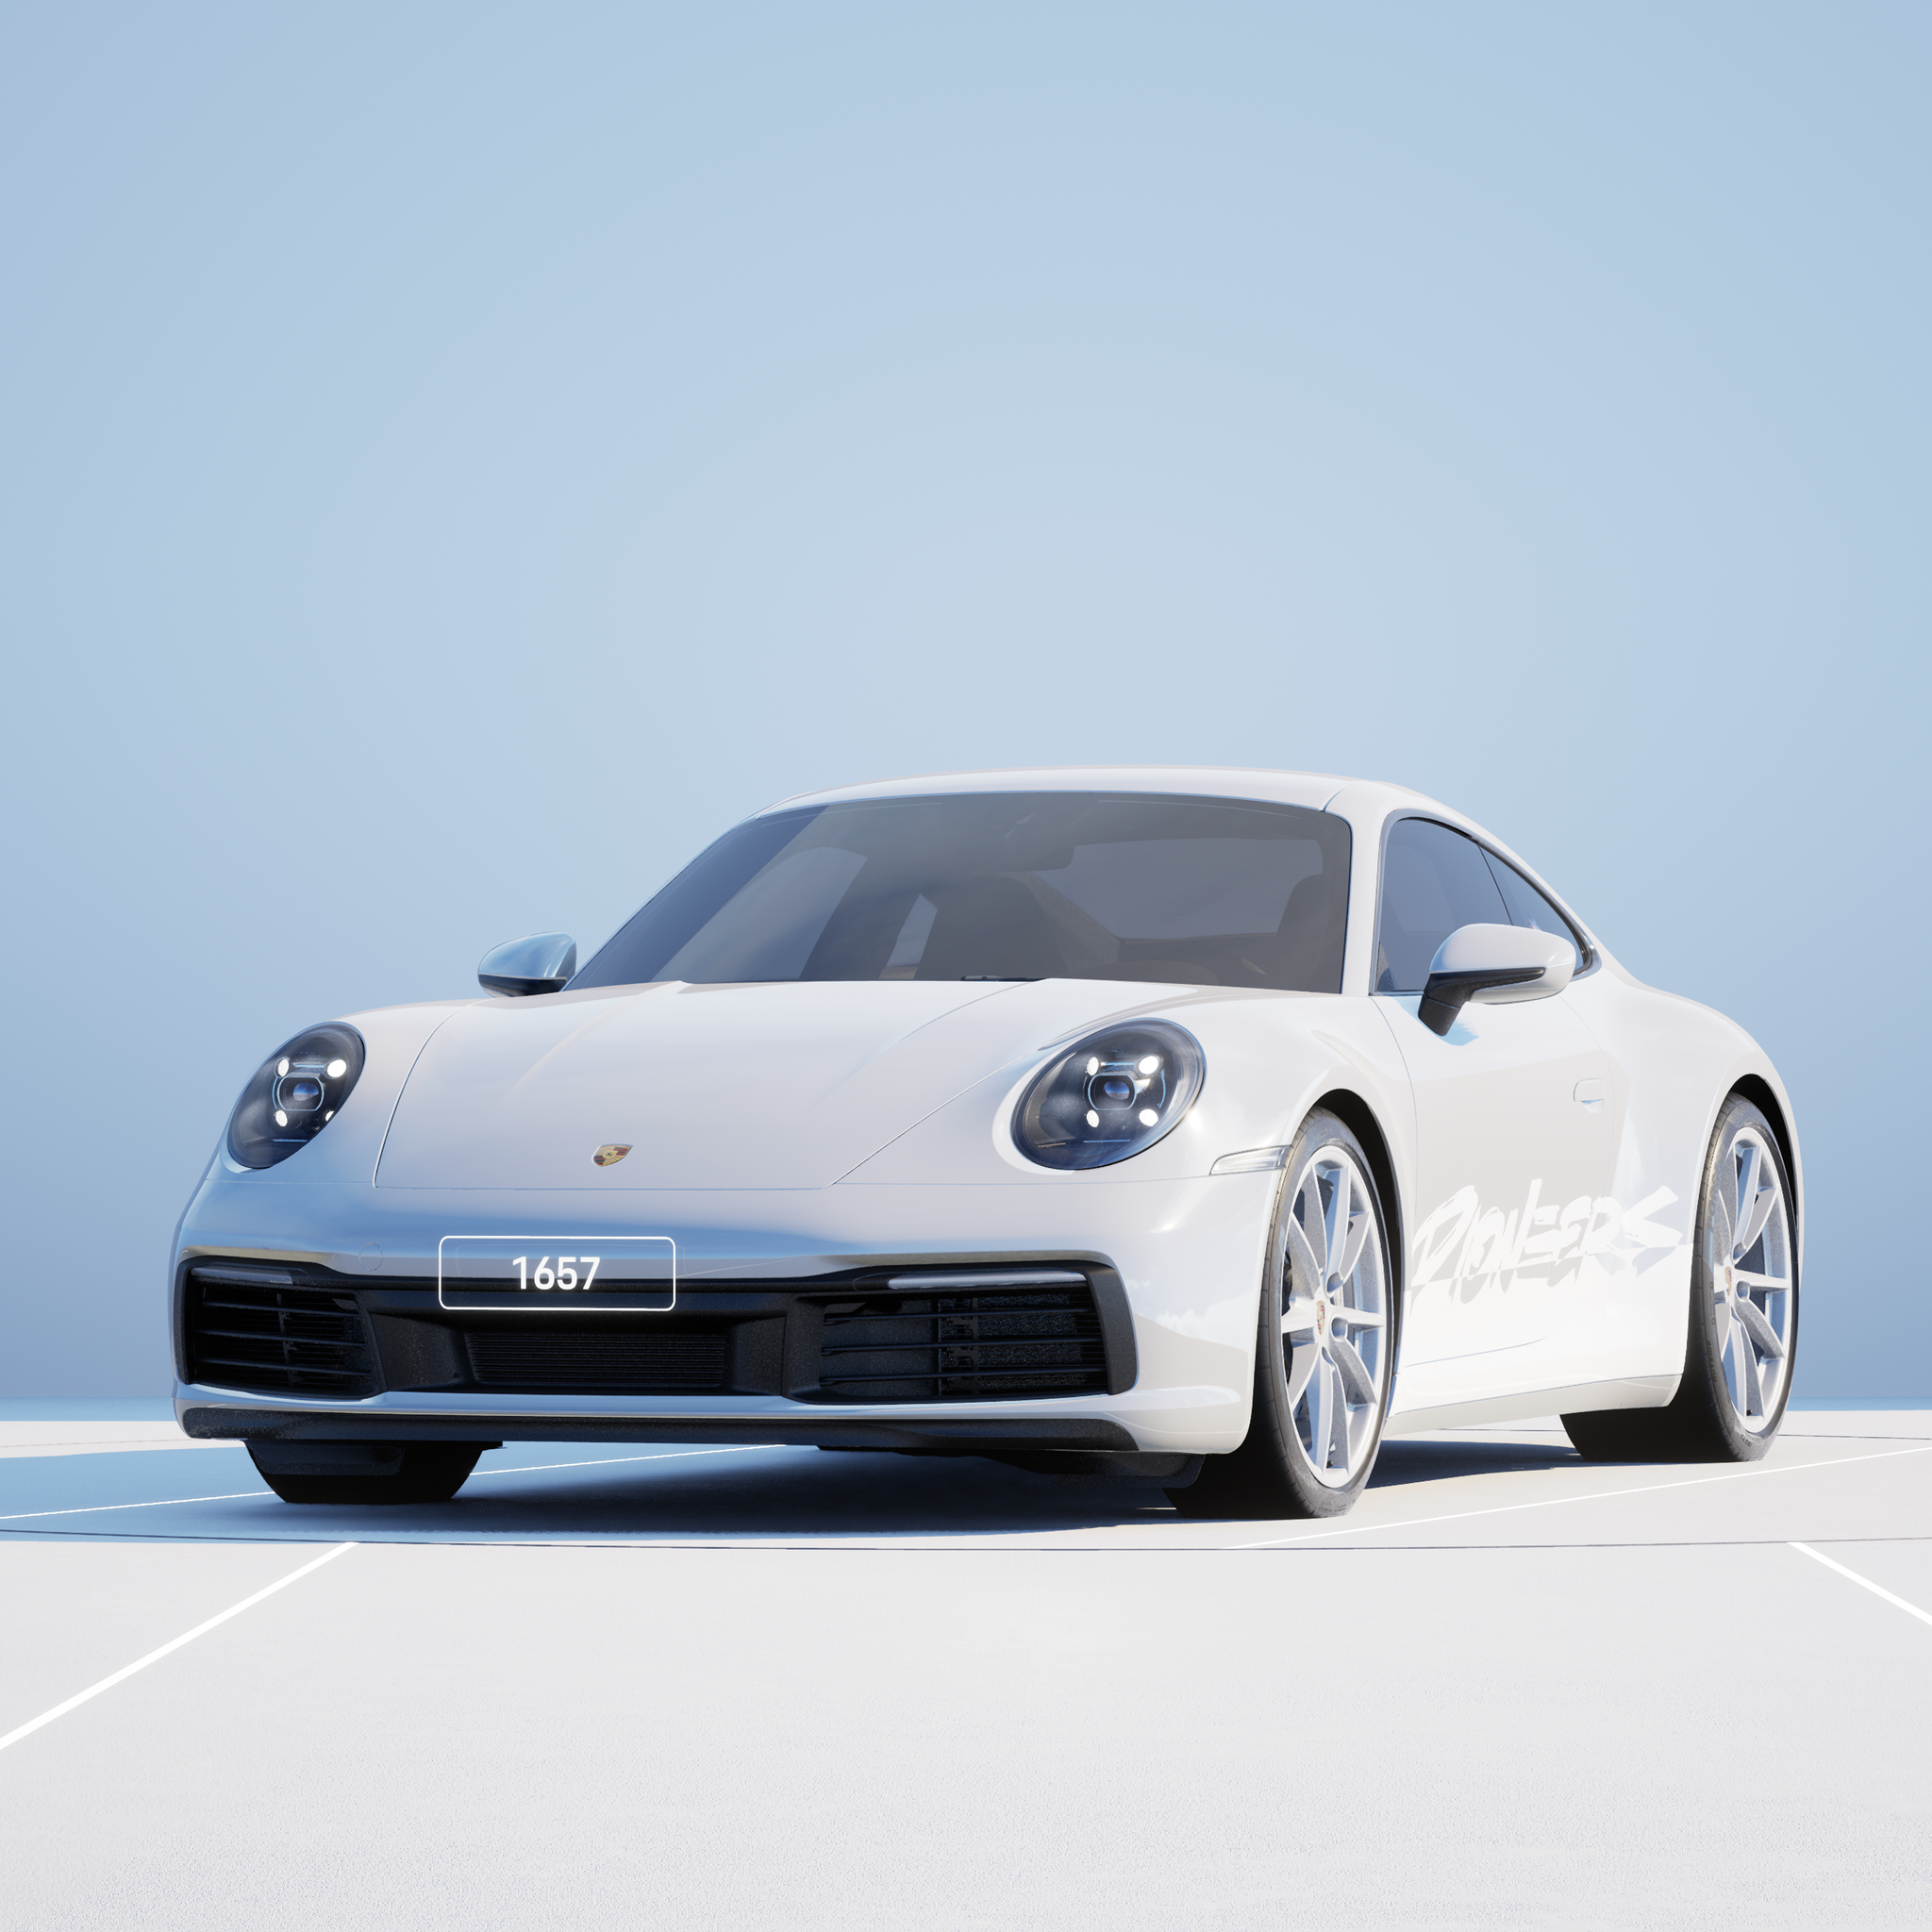 The PORSCHΞ 911 1657 image in phase